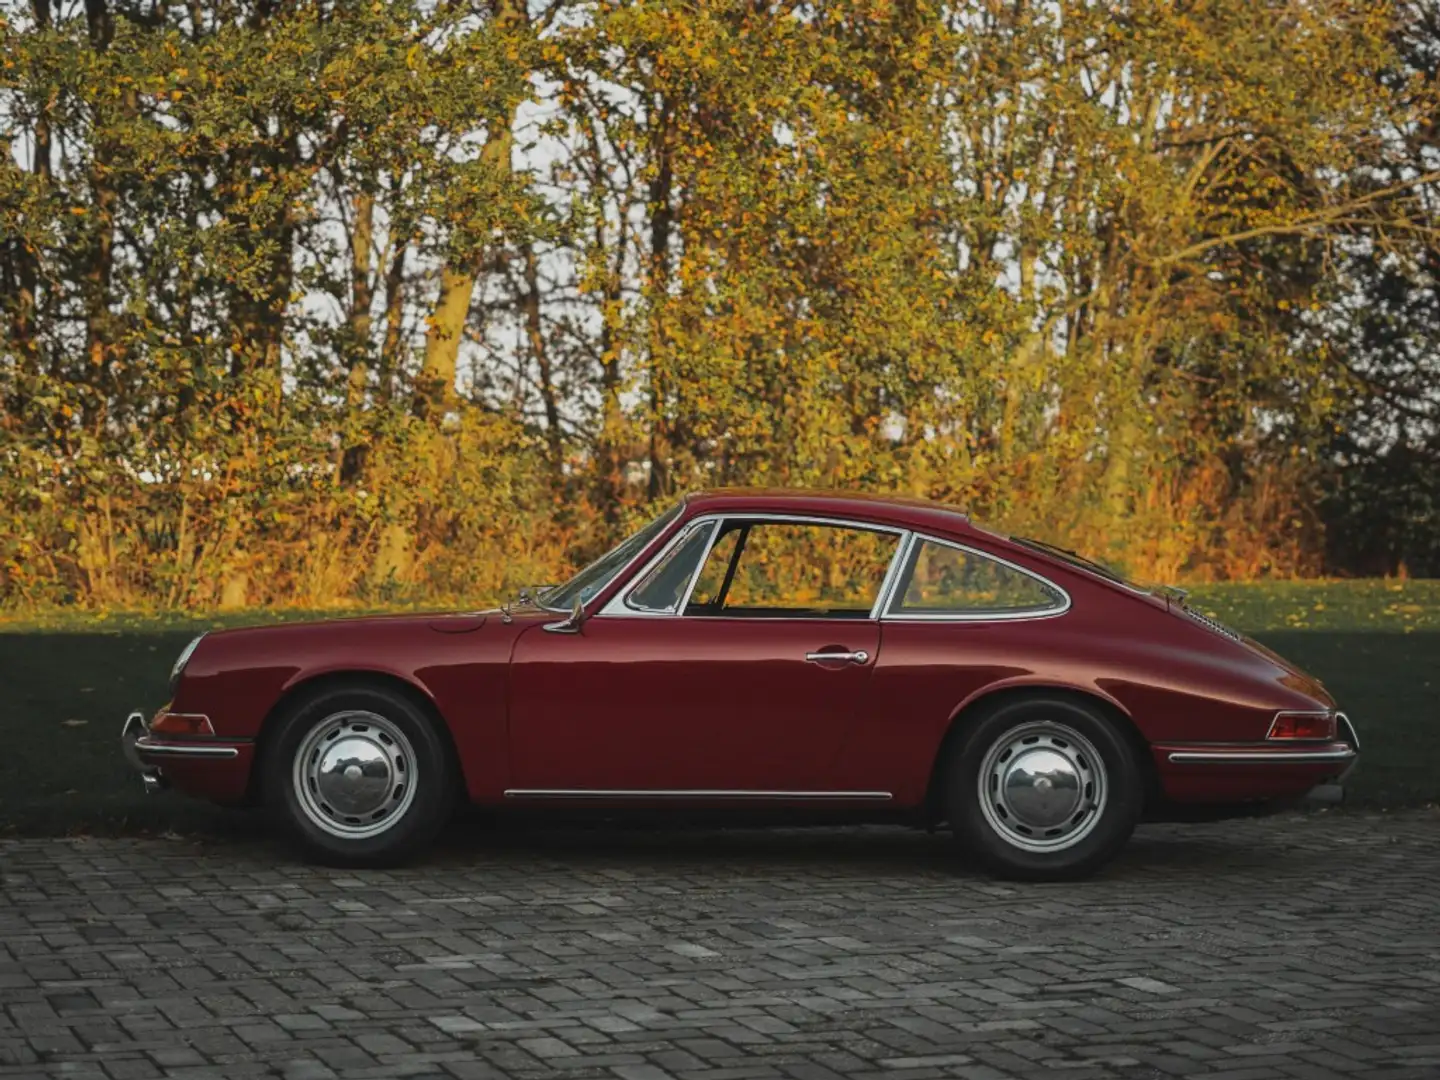 Porsche 911 1965 911 Coupe Matching numbers early chassis numb Rouge - 2